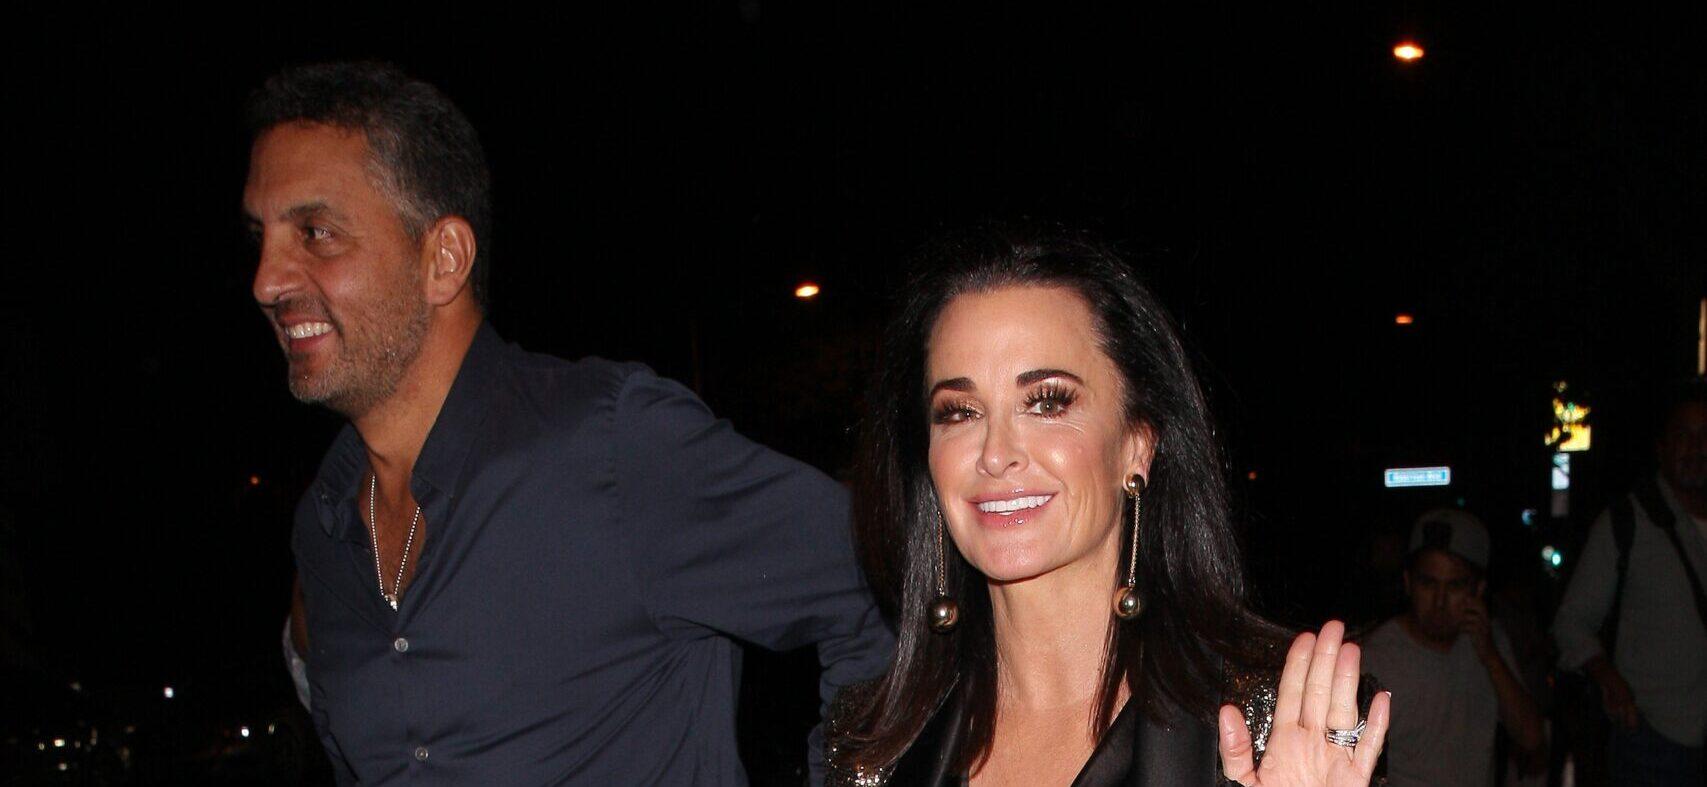 THIS ‘RHOBH’ Cast Member Has Some Thoughts On Kyle Richards’ Split!